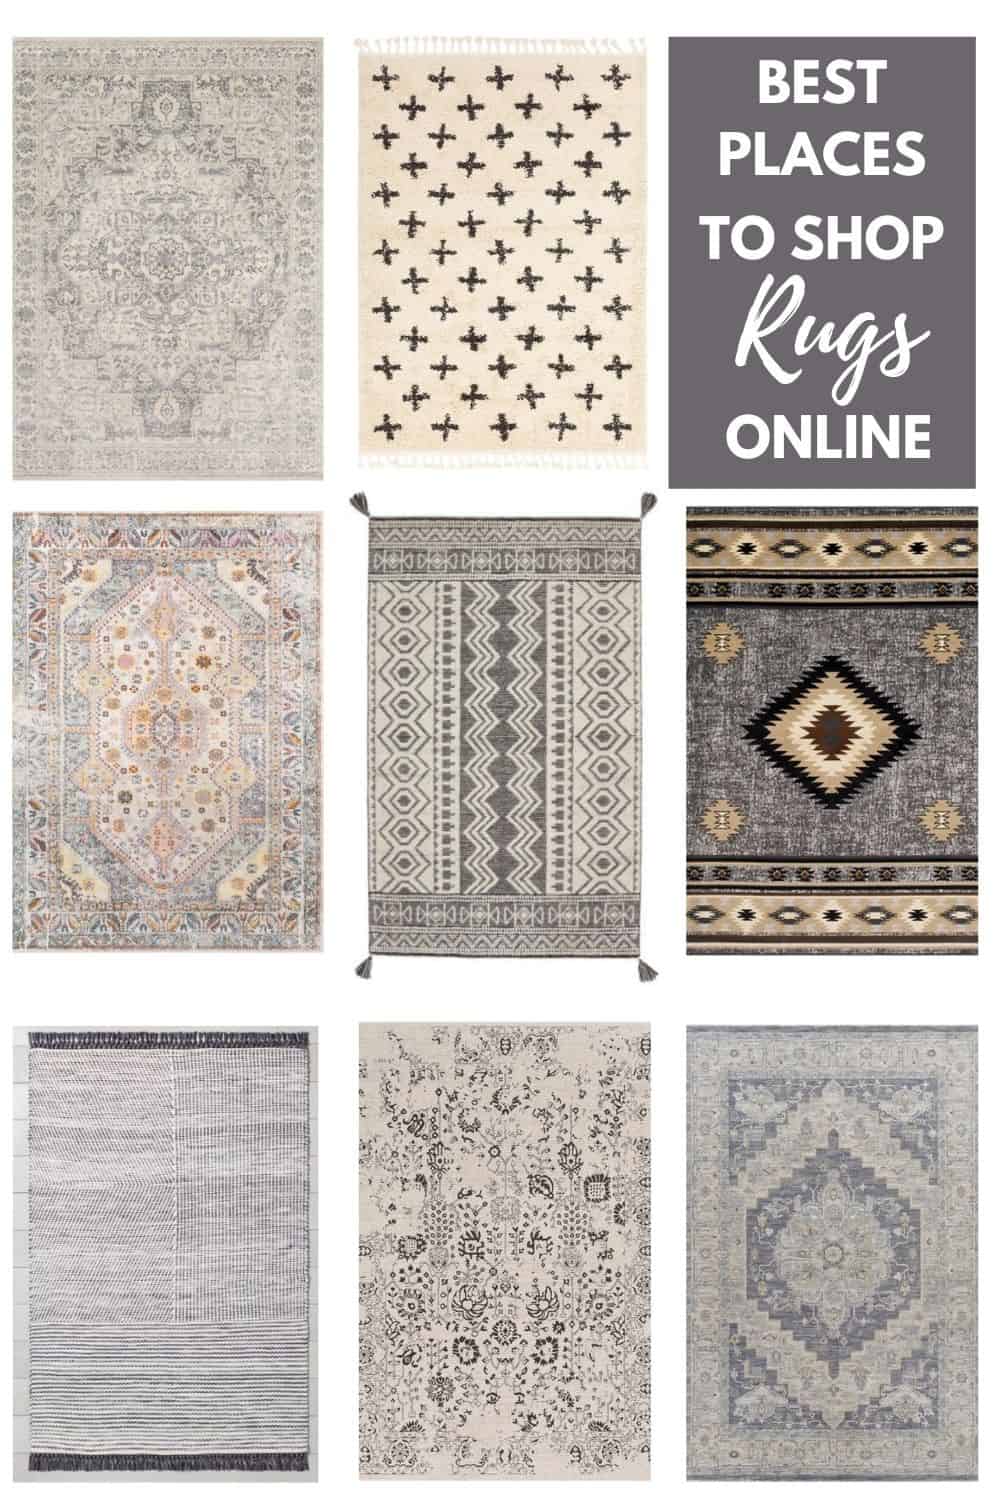 The 14 Best Places to Buy Rugs Online - West Magnolia Charm